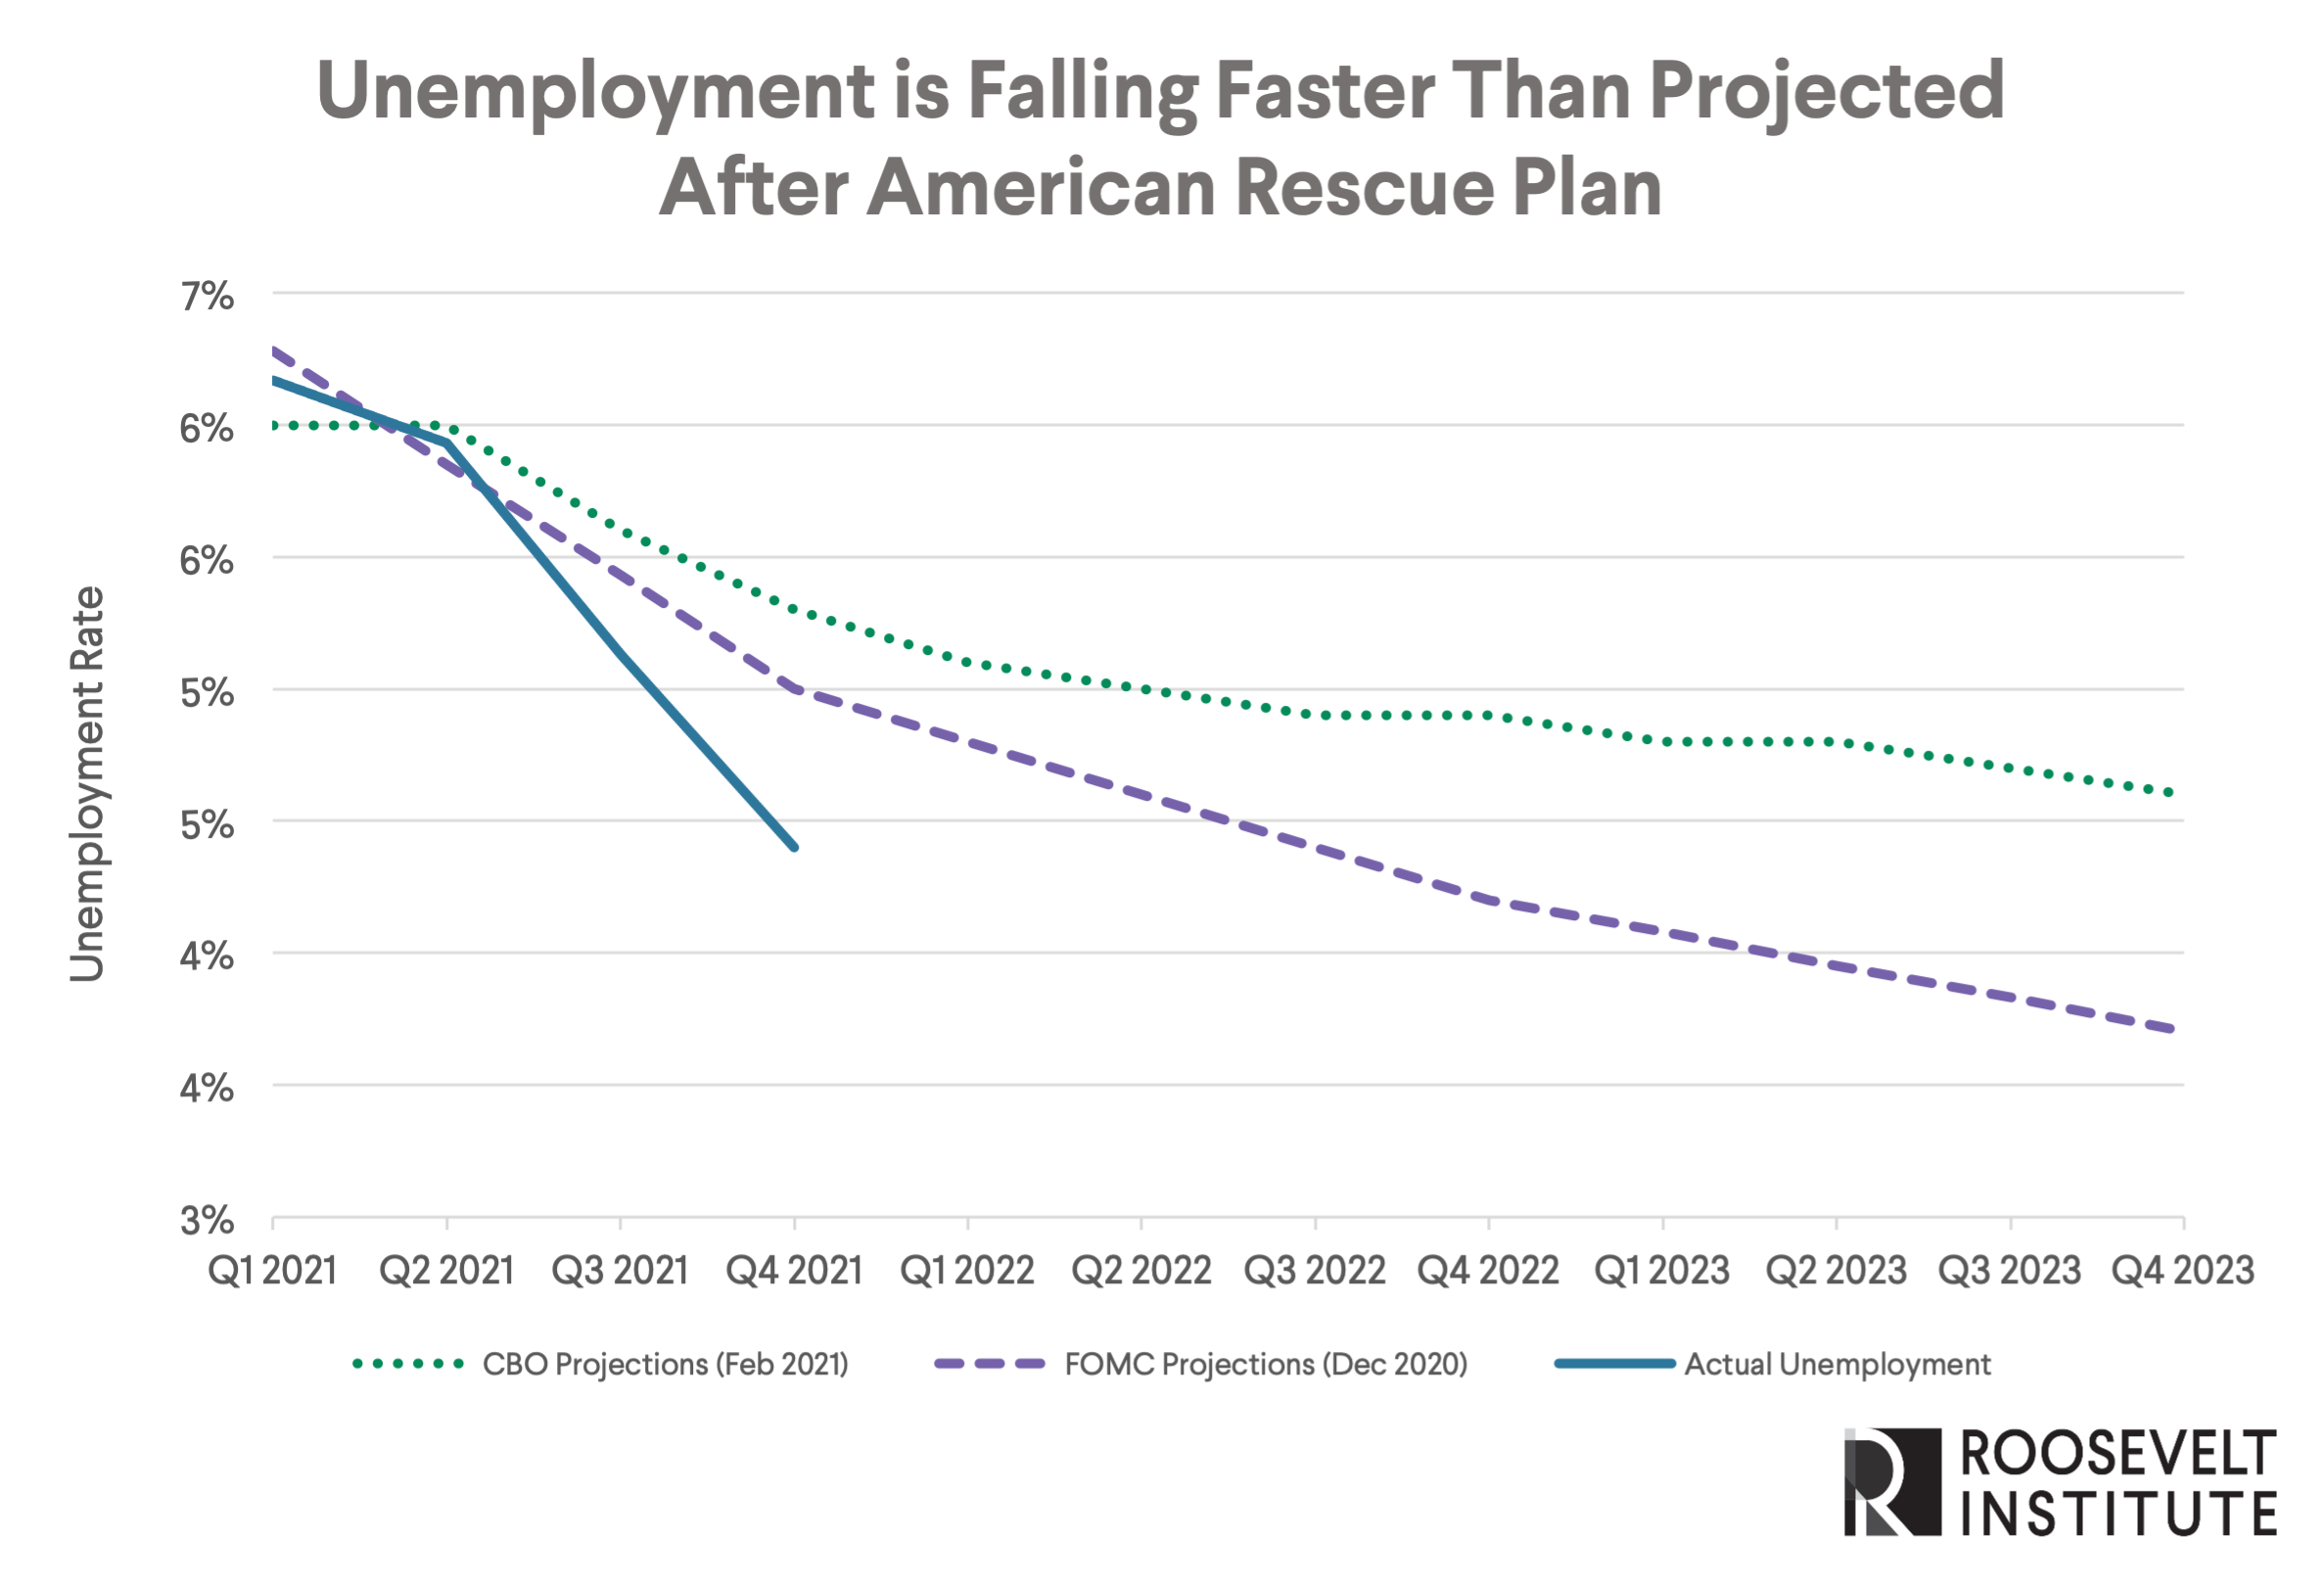 Chart showing how unemployment is falling faster than projected after the American Rescue Plan